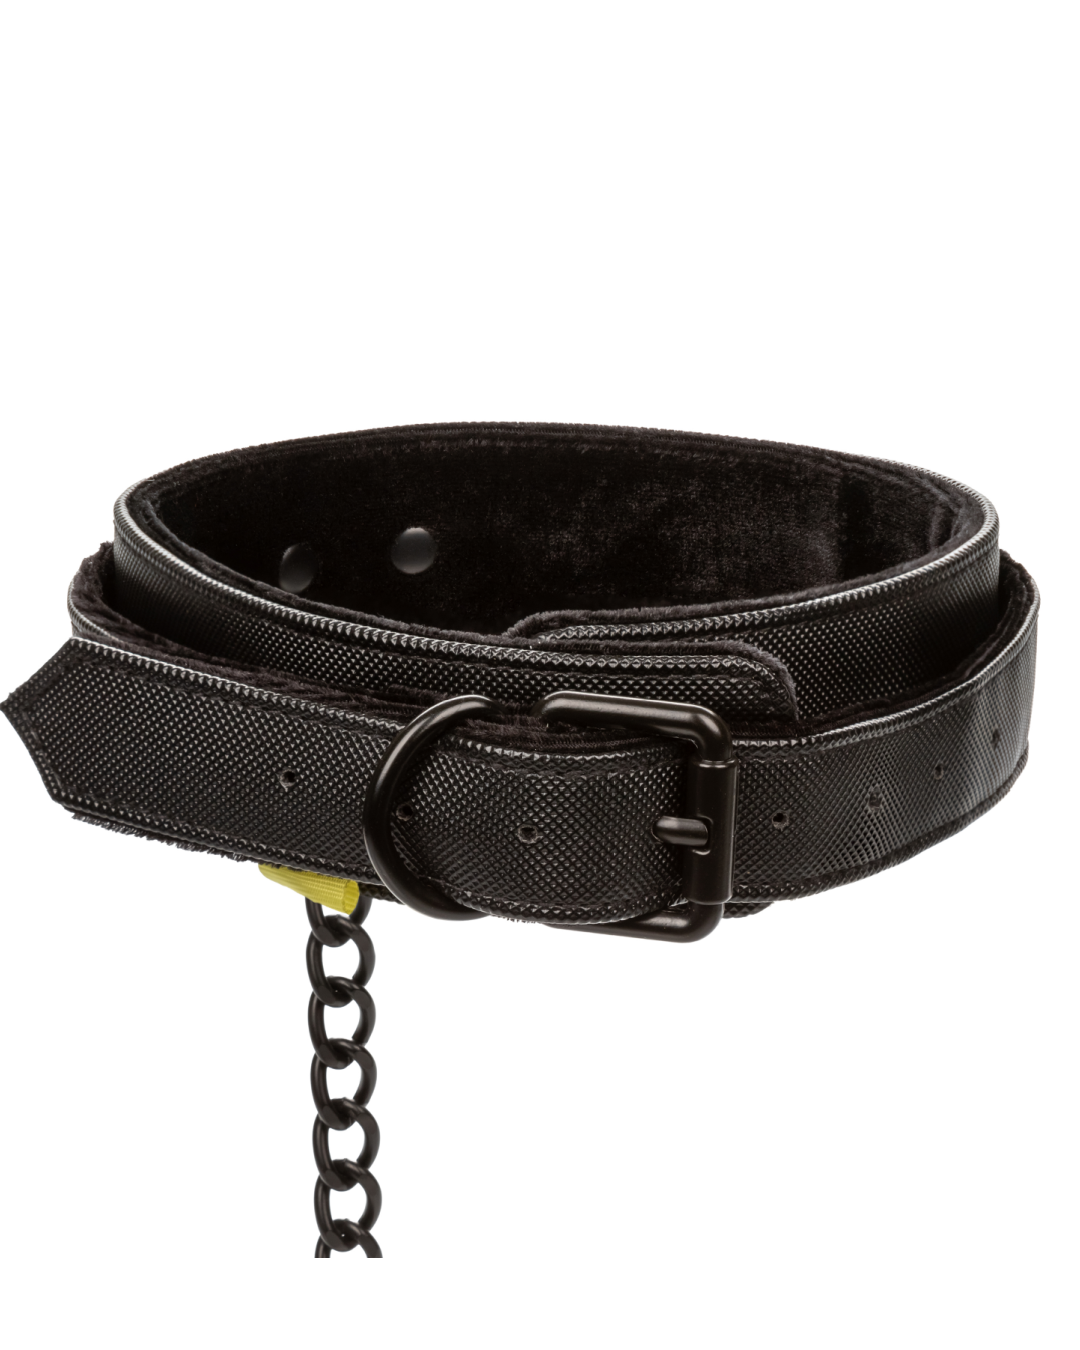 Boundless Collar and Leash Set by Calexotics  back of product 